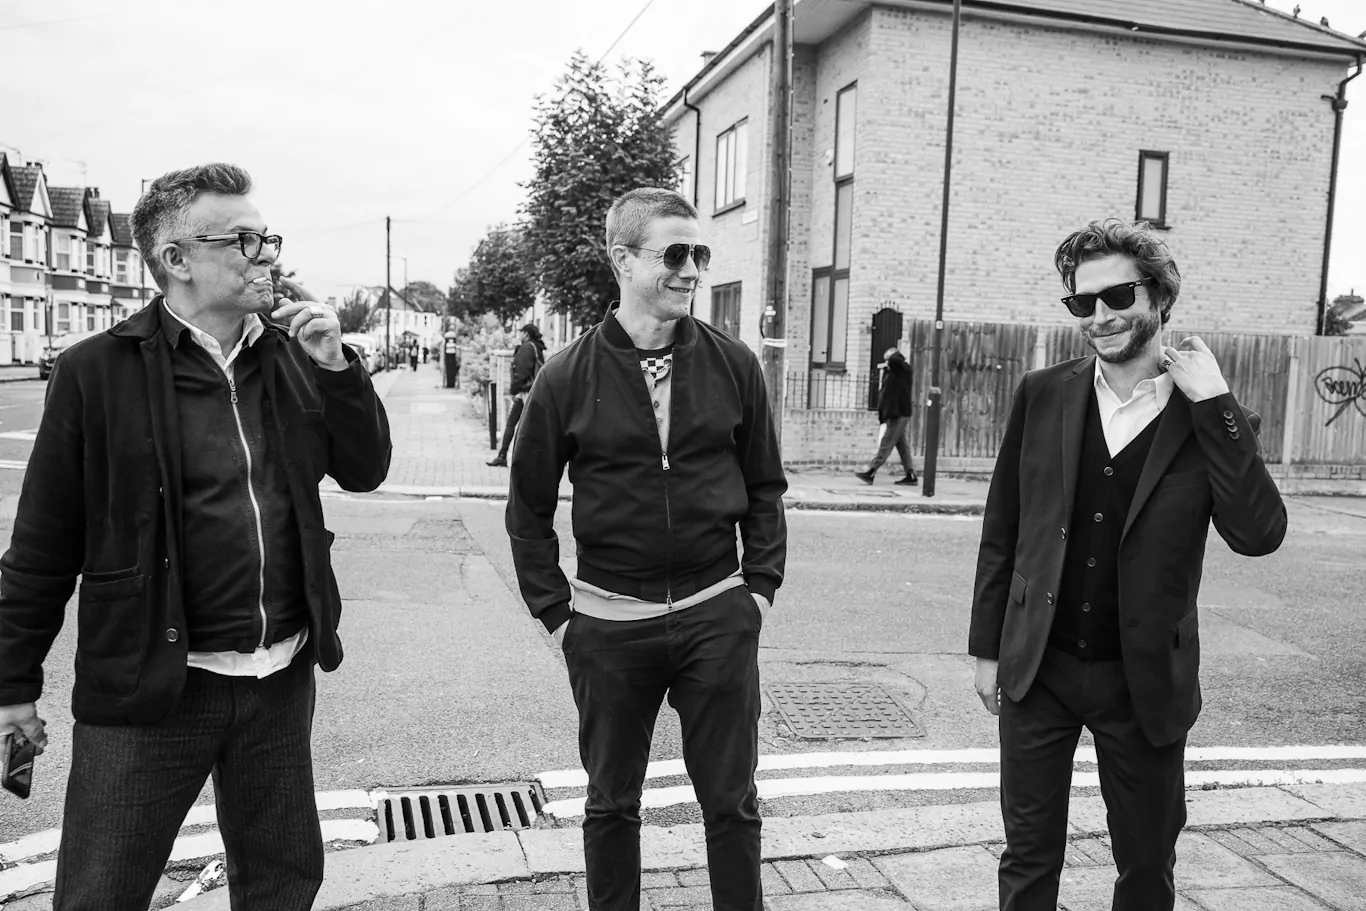 INTERPOL release brand new song ‘Fables’ taken from their new album ‘The Other Side Of Make-Believe’